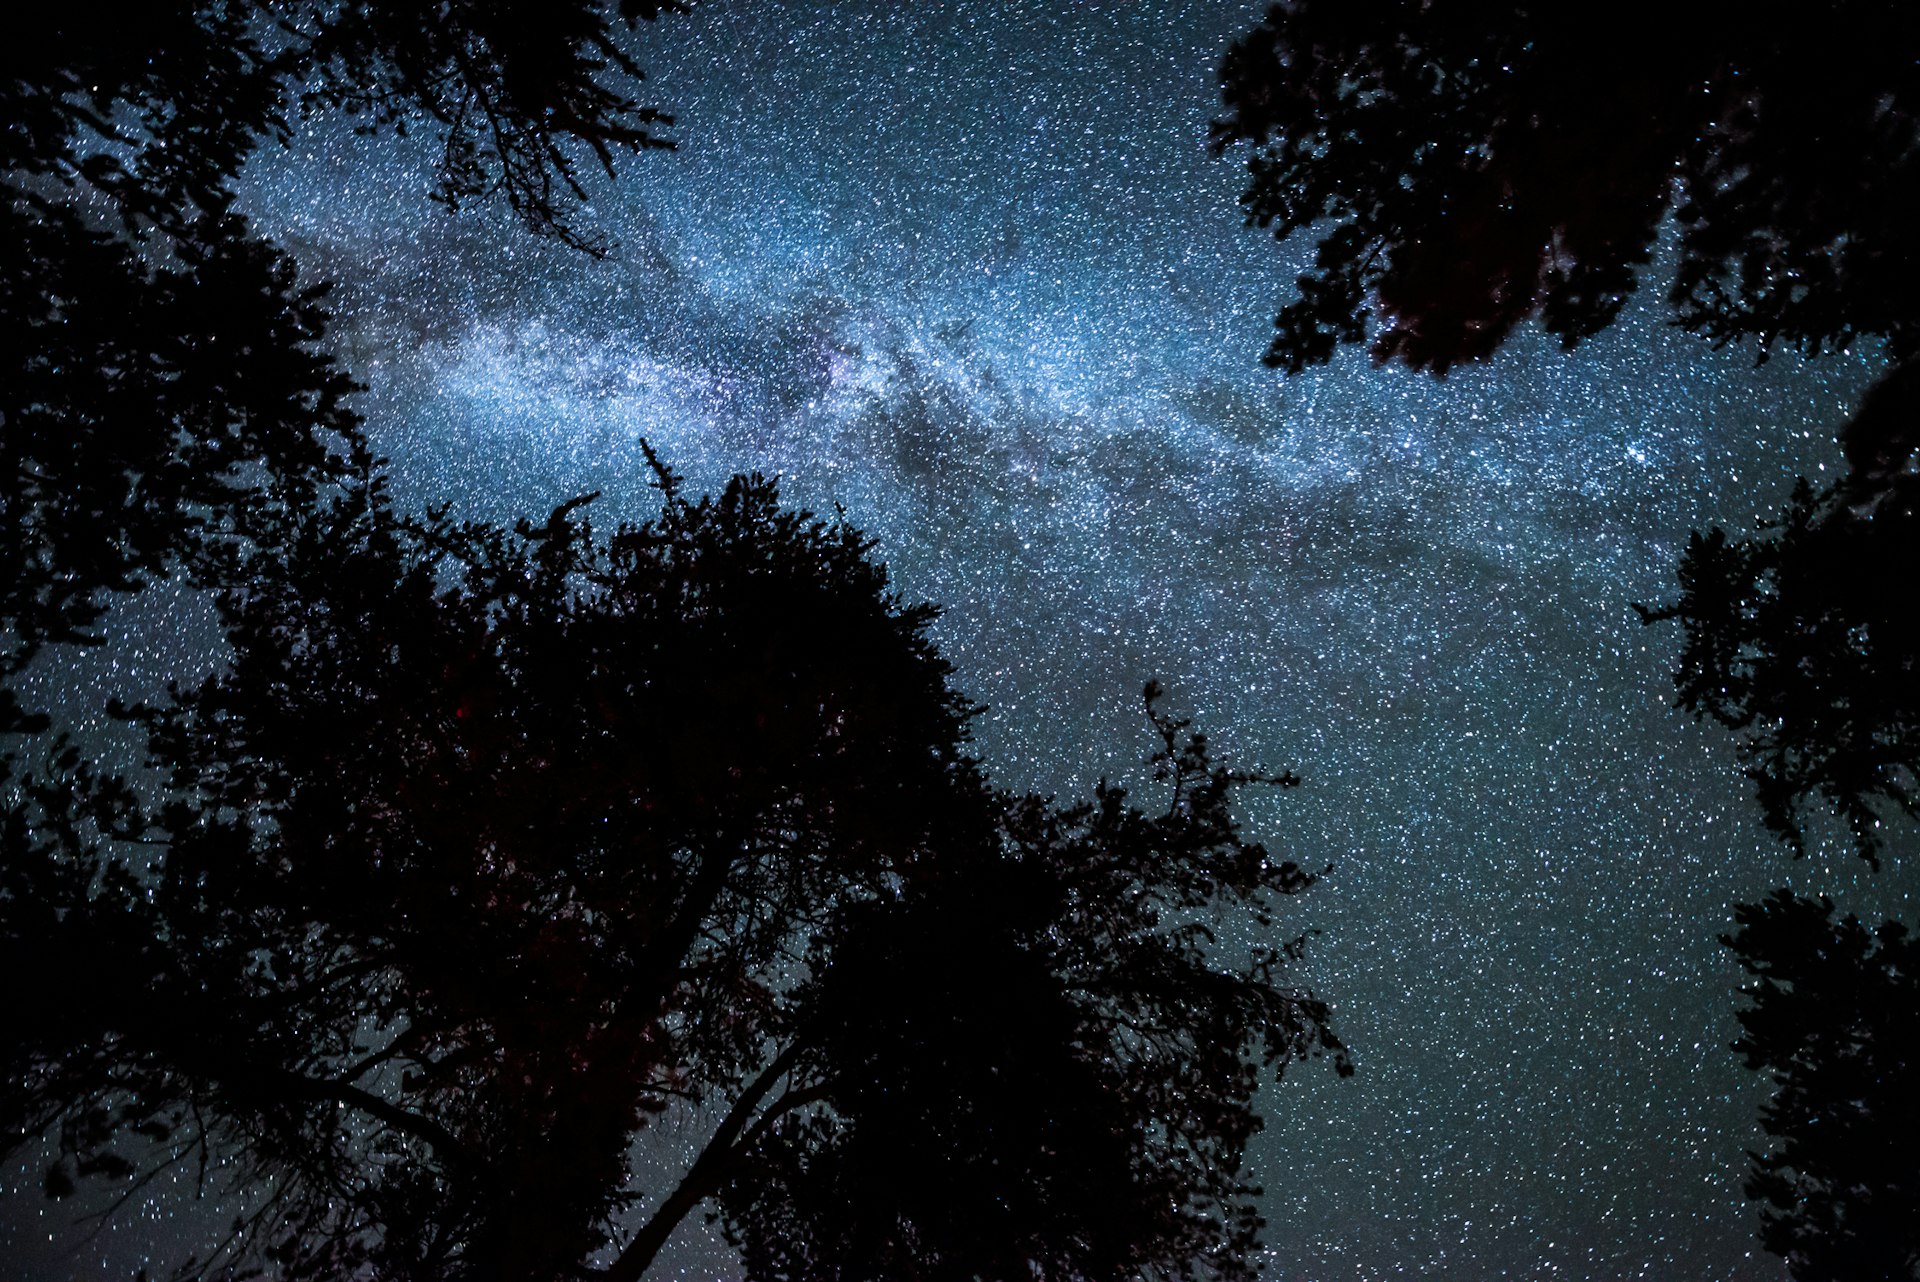 The Milky Way's core, seen straight up through trees